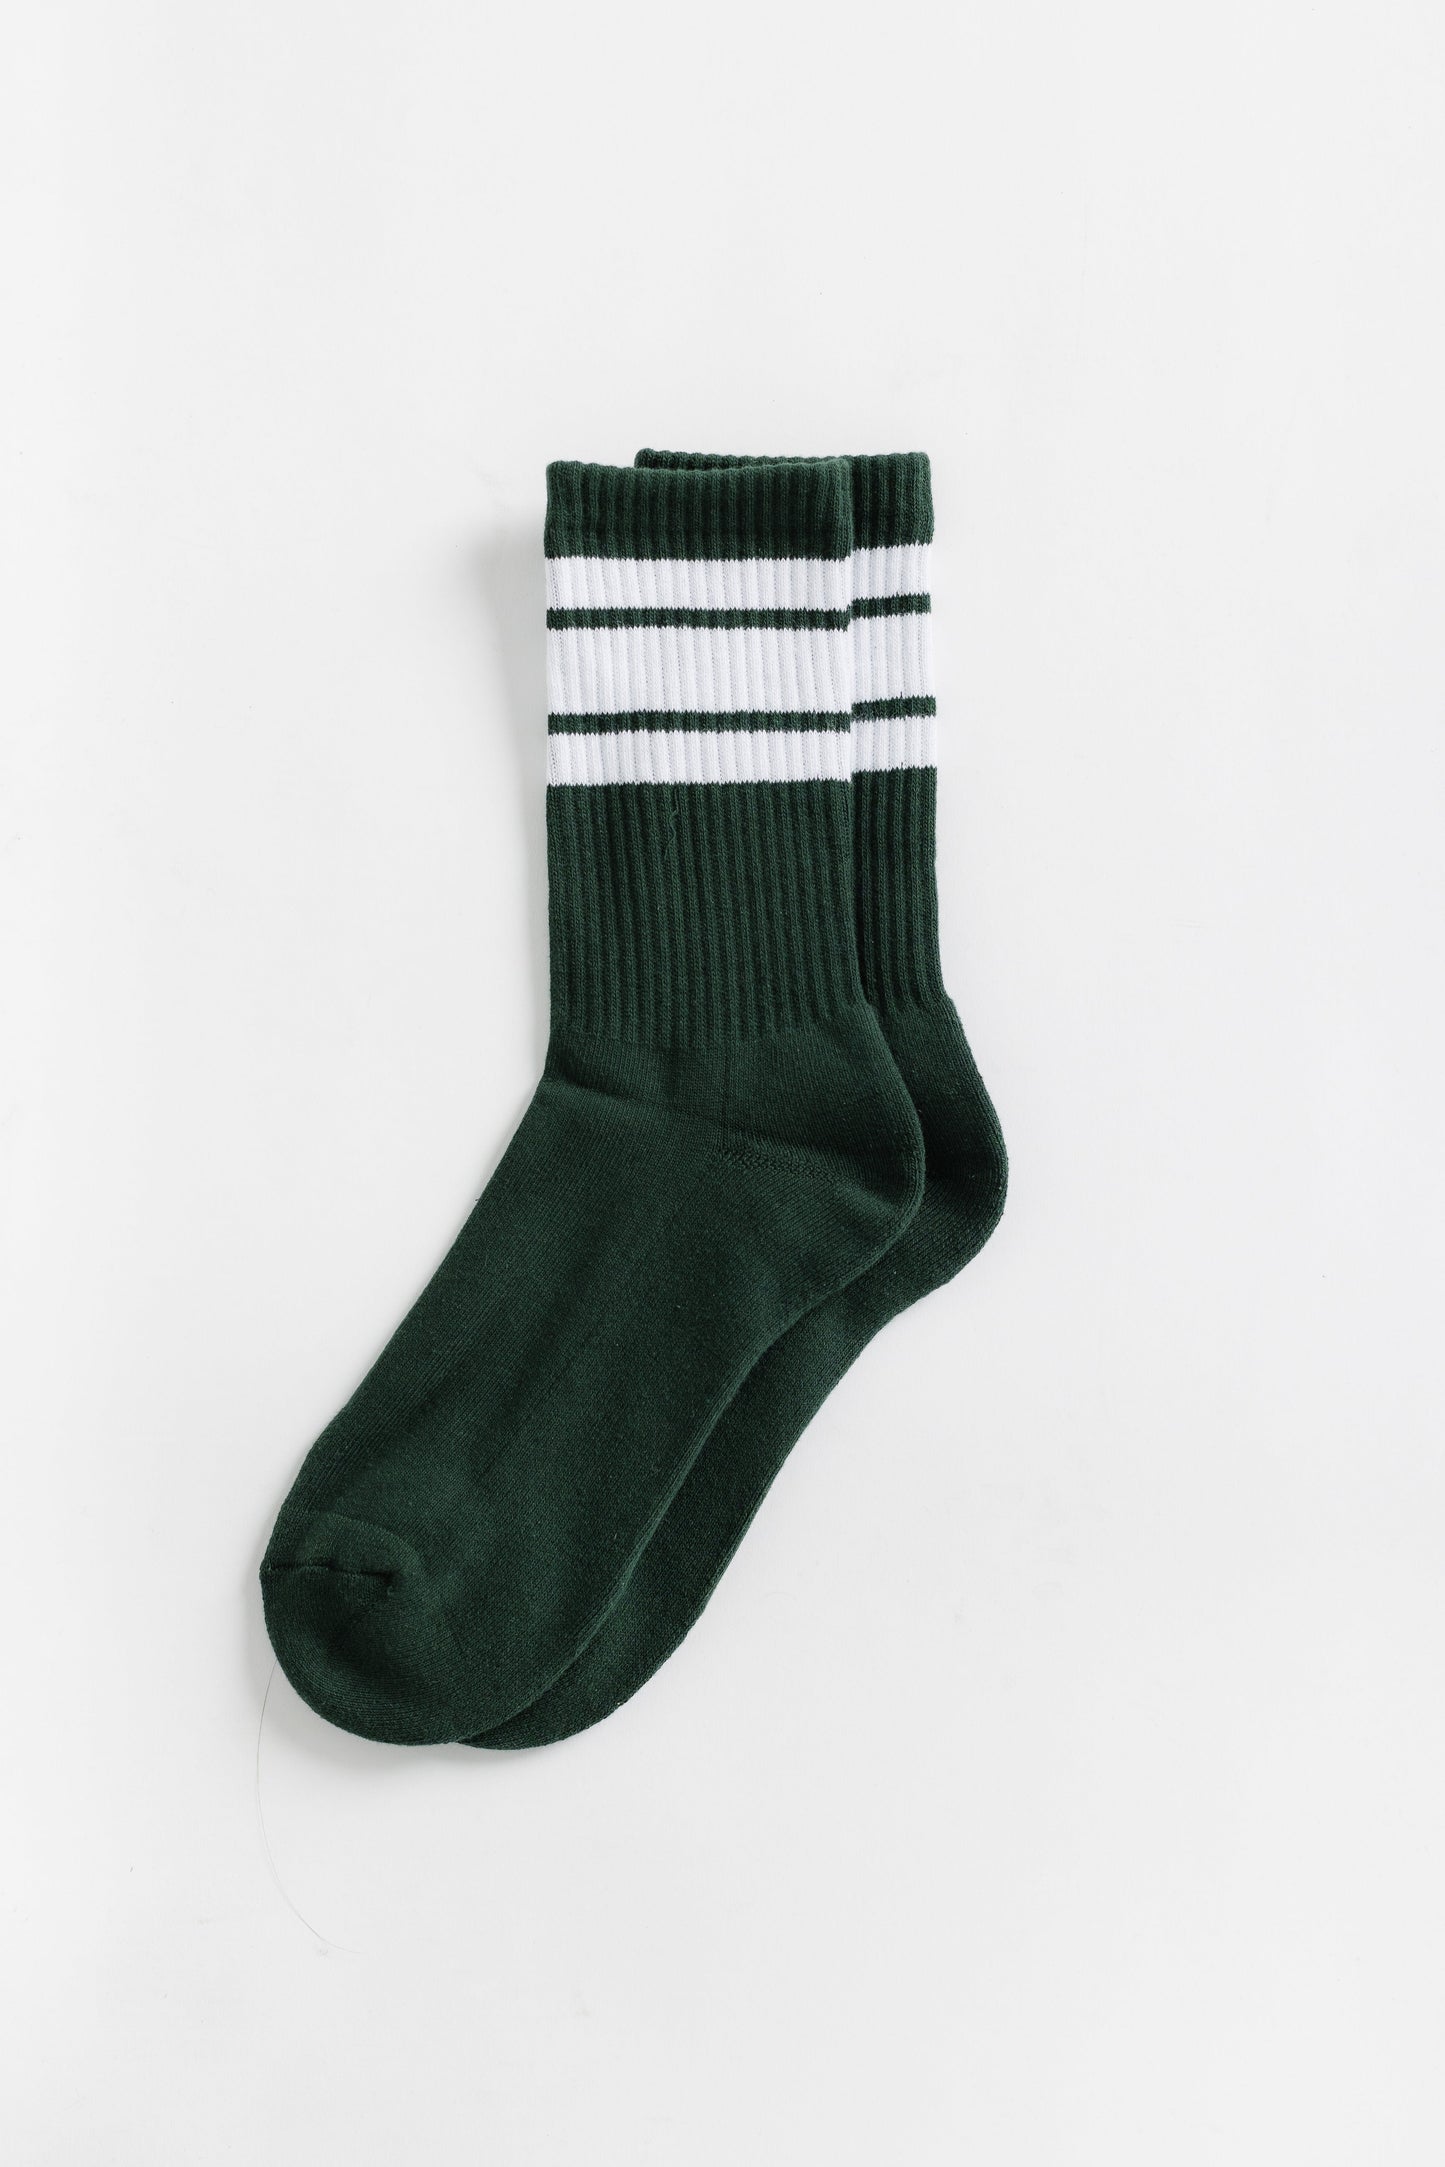 Cove Vail Stripe Socks WOMEN'S SOCKS Cove Accessories Forest Green OS 